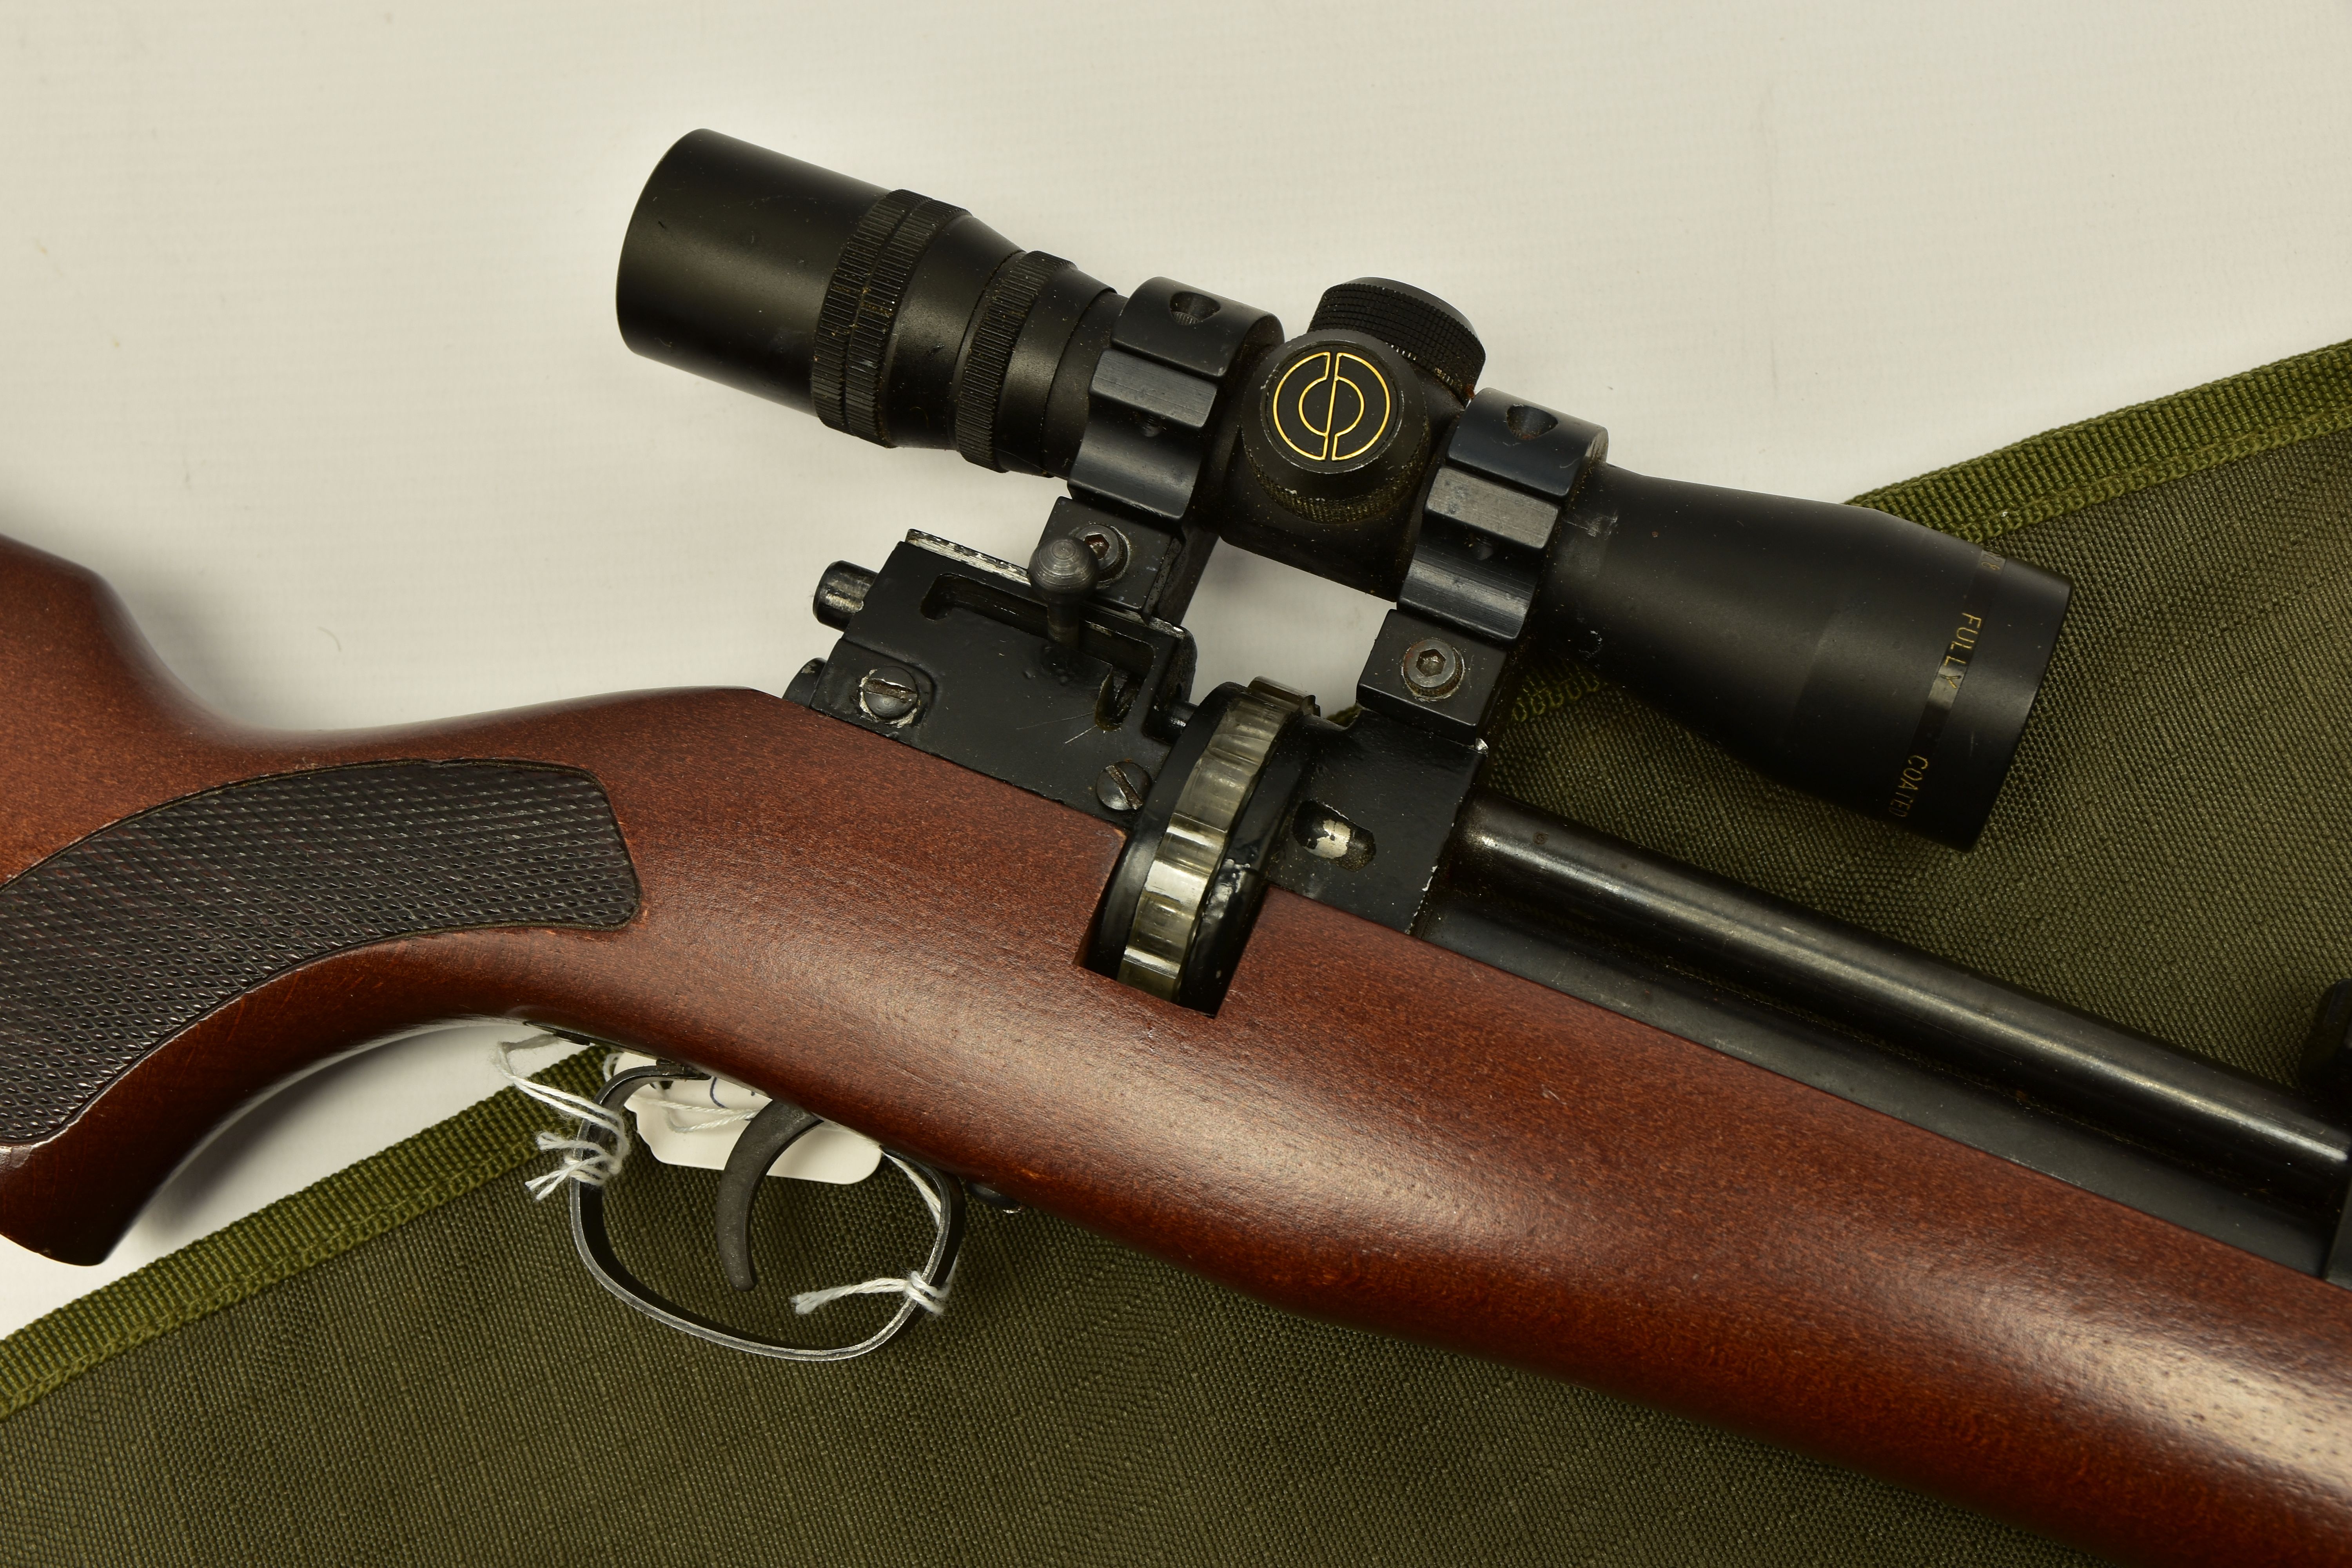 A .22 '' ROTARY MAGAZINE PUMP UP AIR RIFLE fitted with a beech stock, in working order and excellent - Image 4 of 9